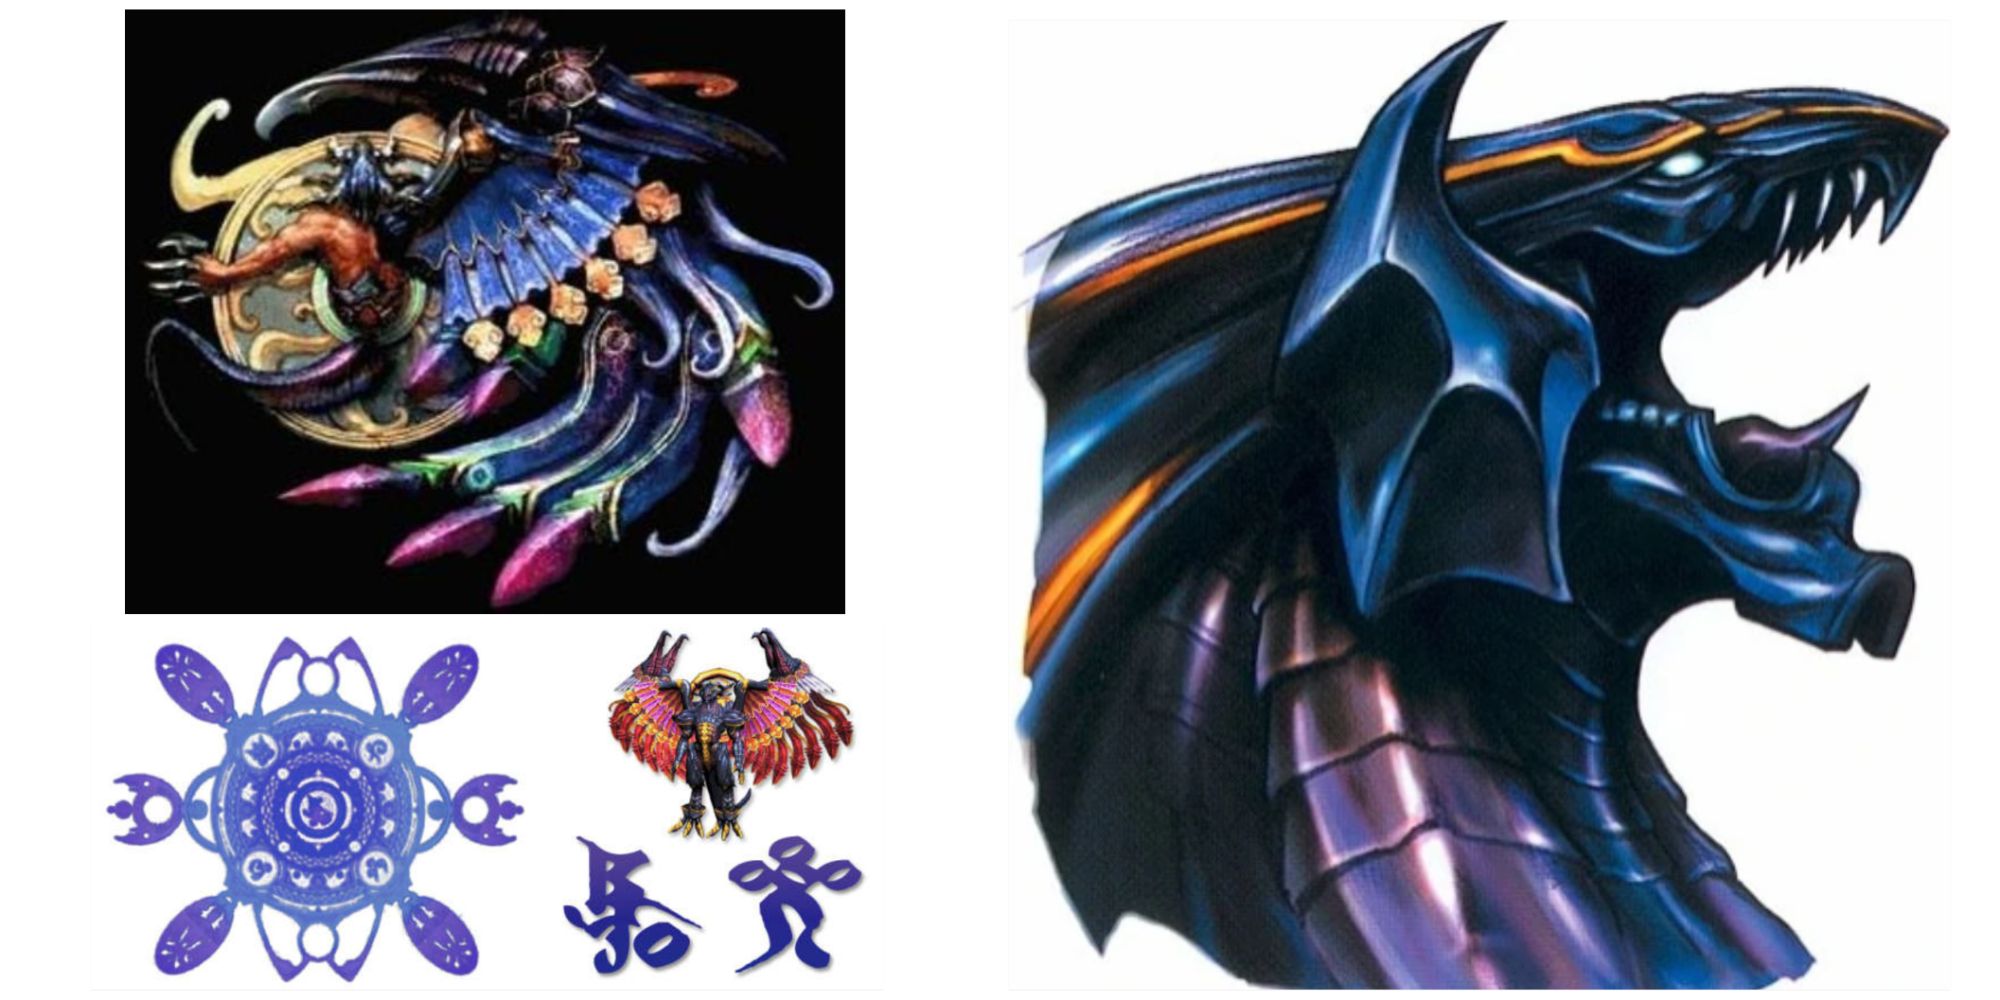 Final Fantasy X Bahamut, with his in-game photo, fayth statue, summon glyph and symbol, and model/sprite